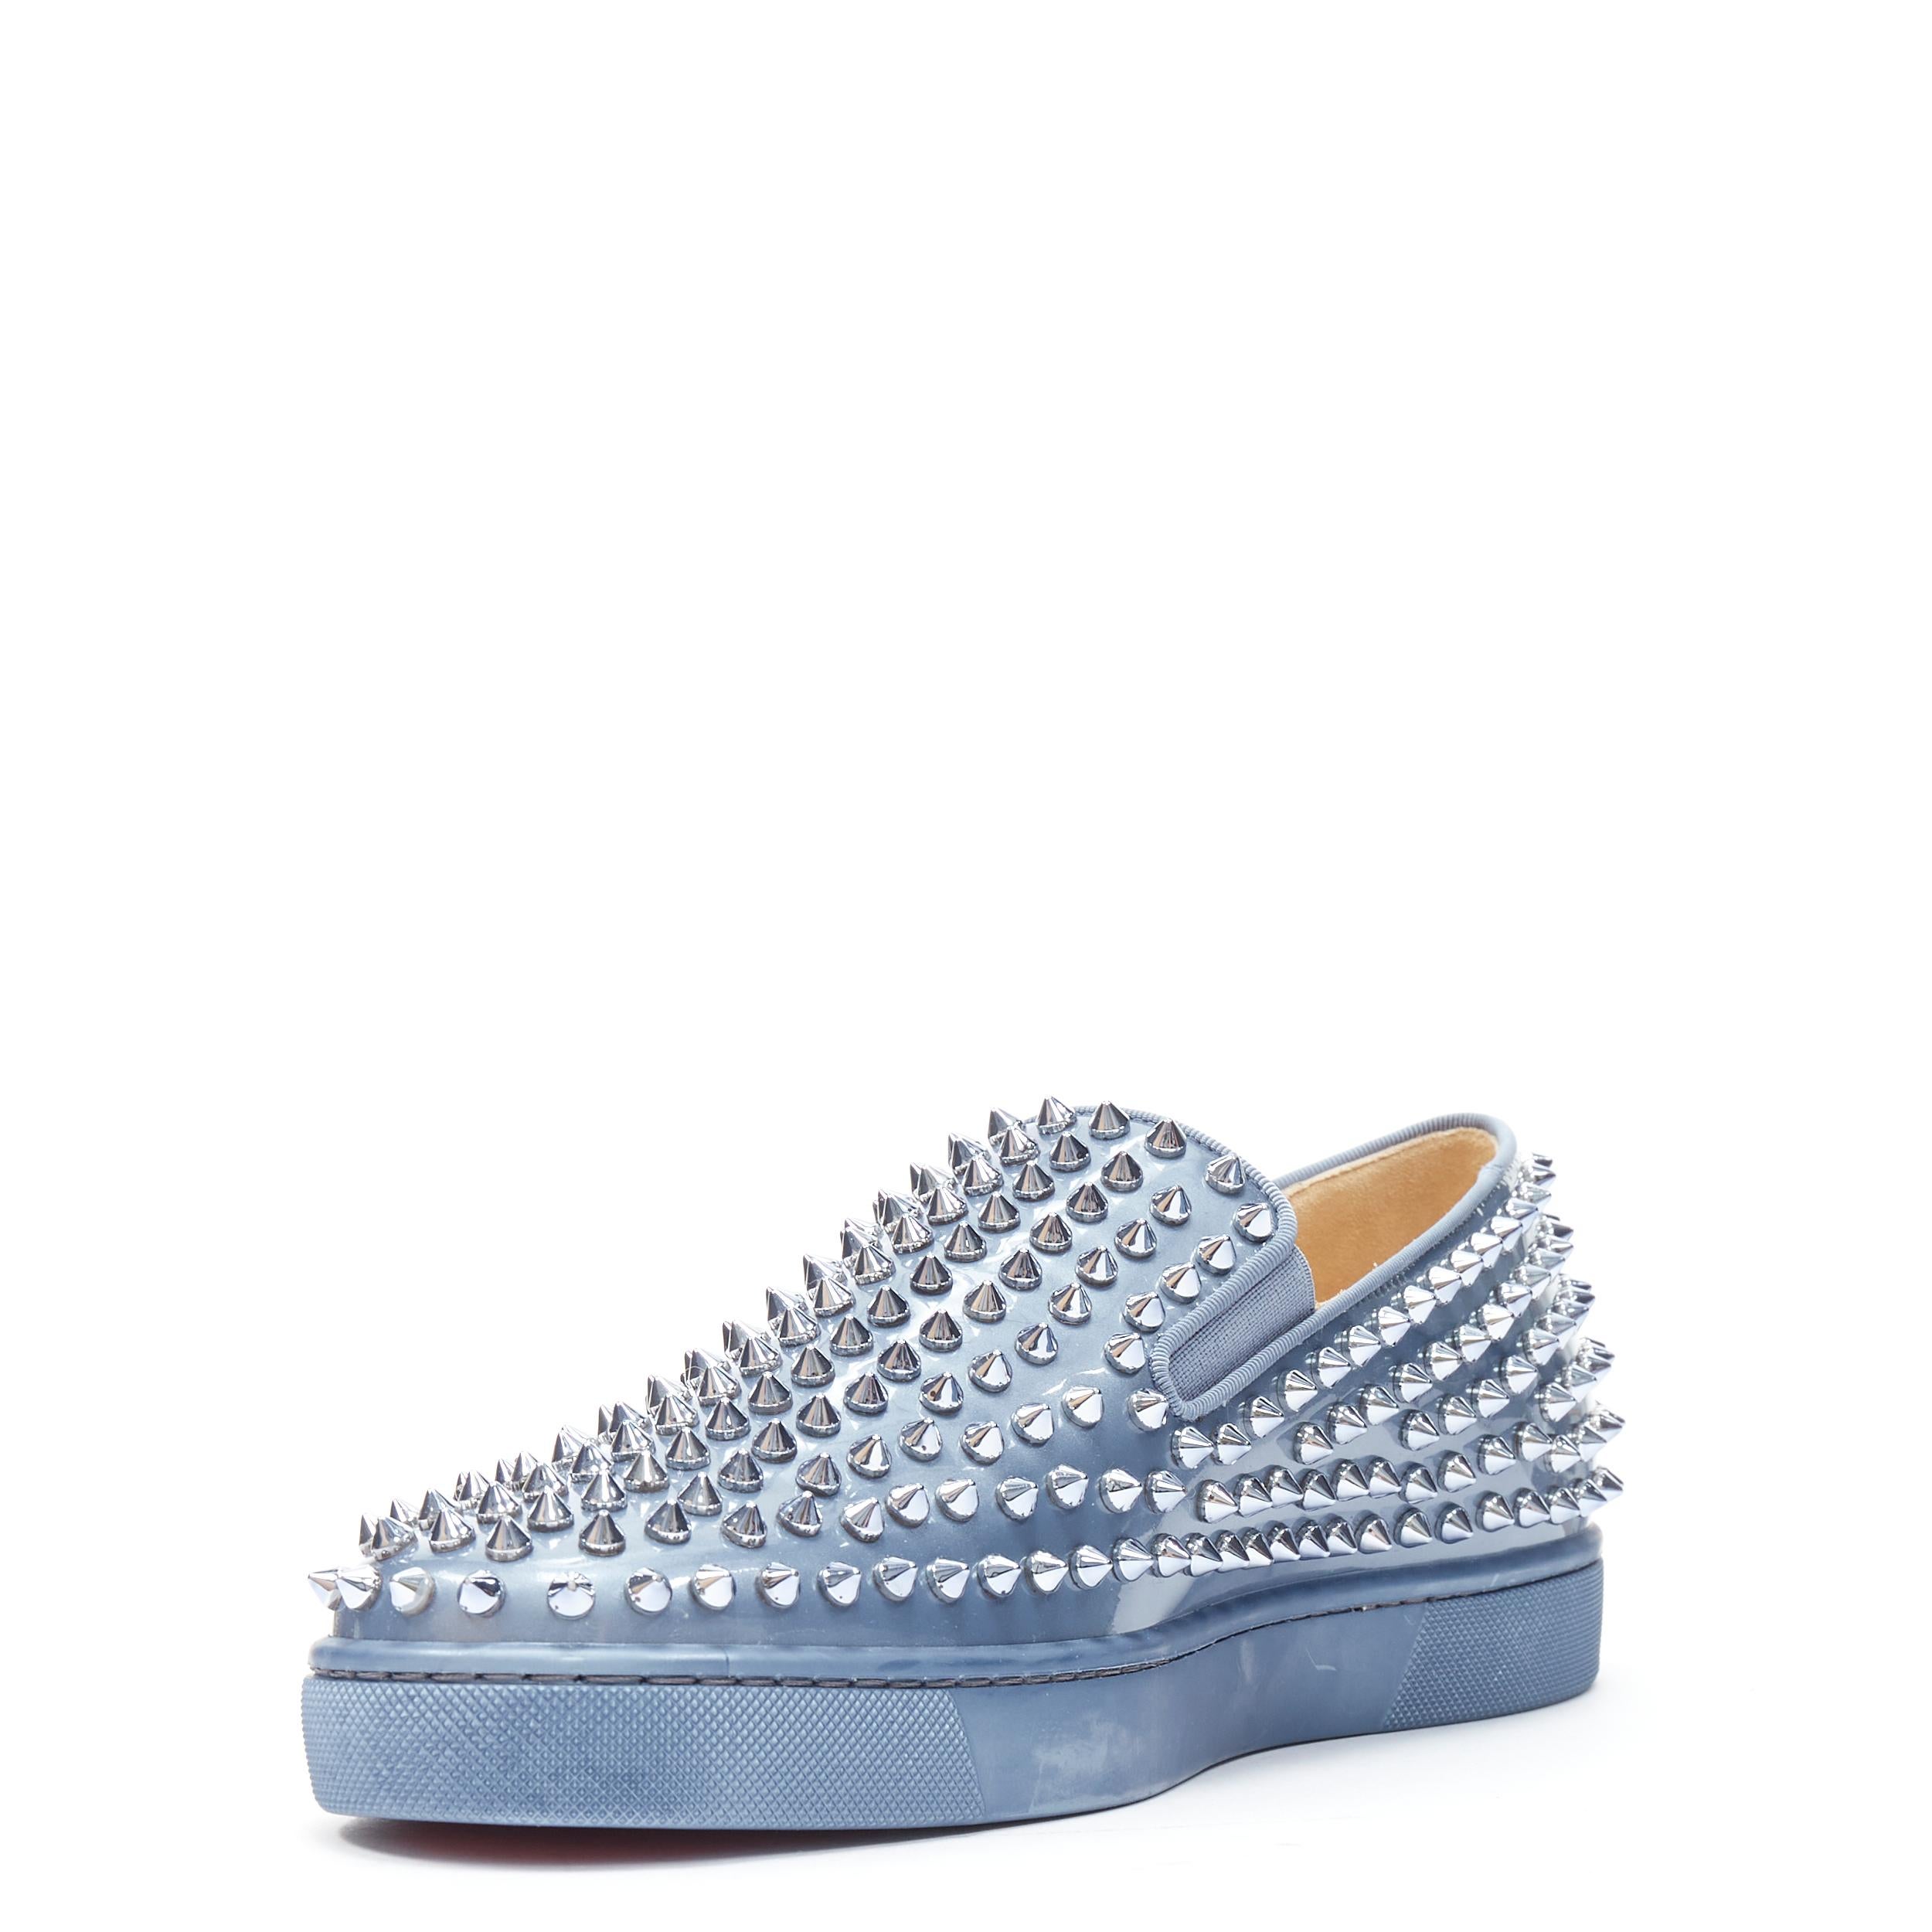 blue and white christian louboutin sneakers